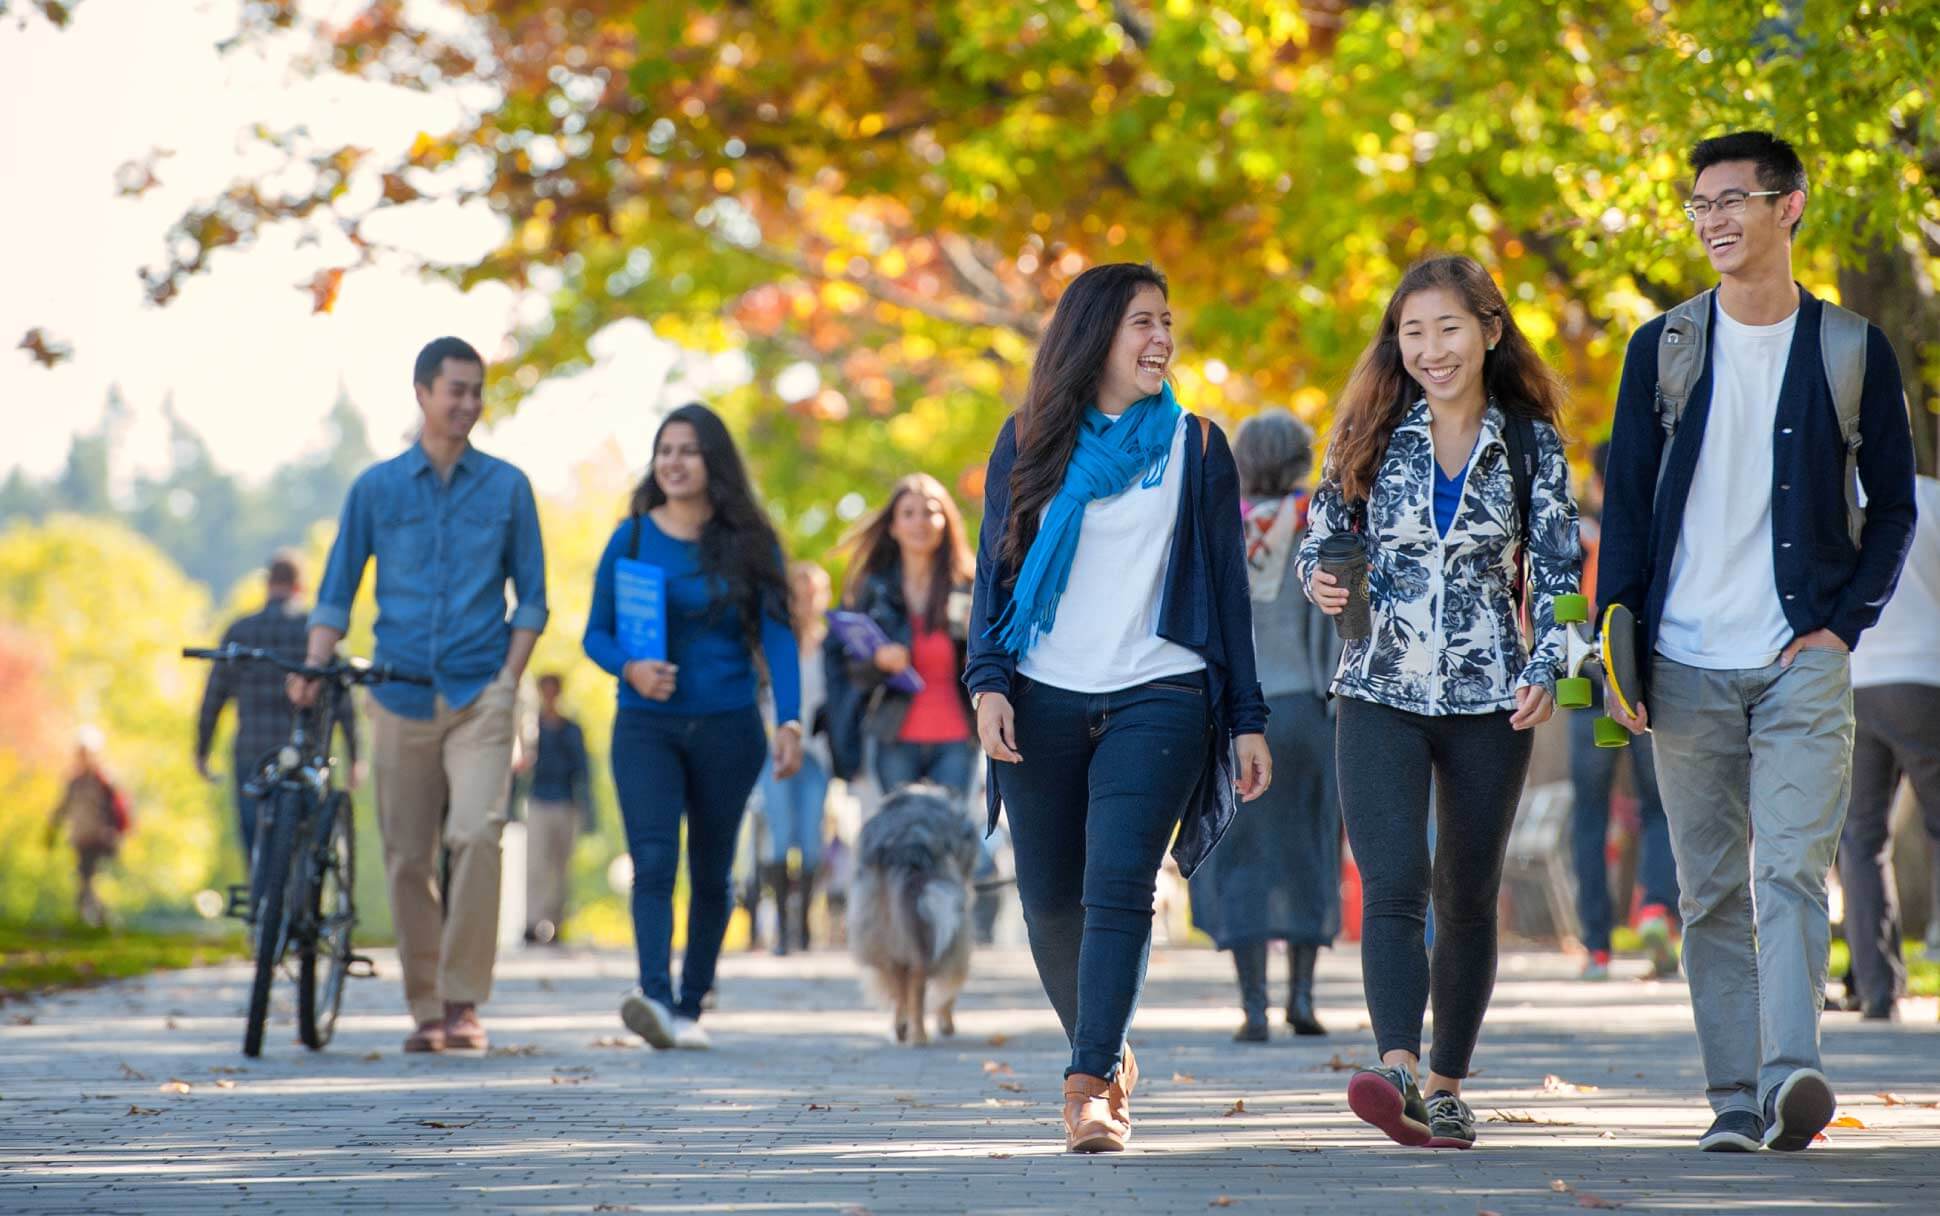 Groups of visitors walk along the paths at the UBC Vancouver campus